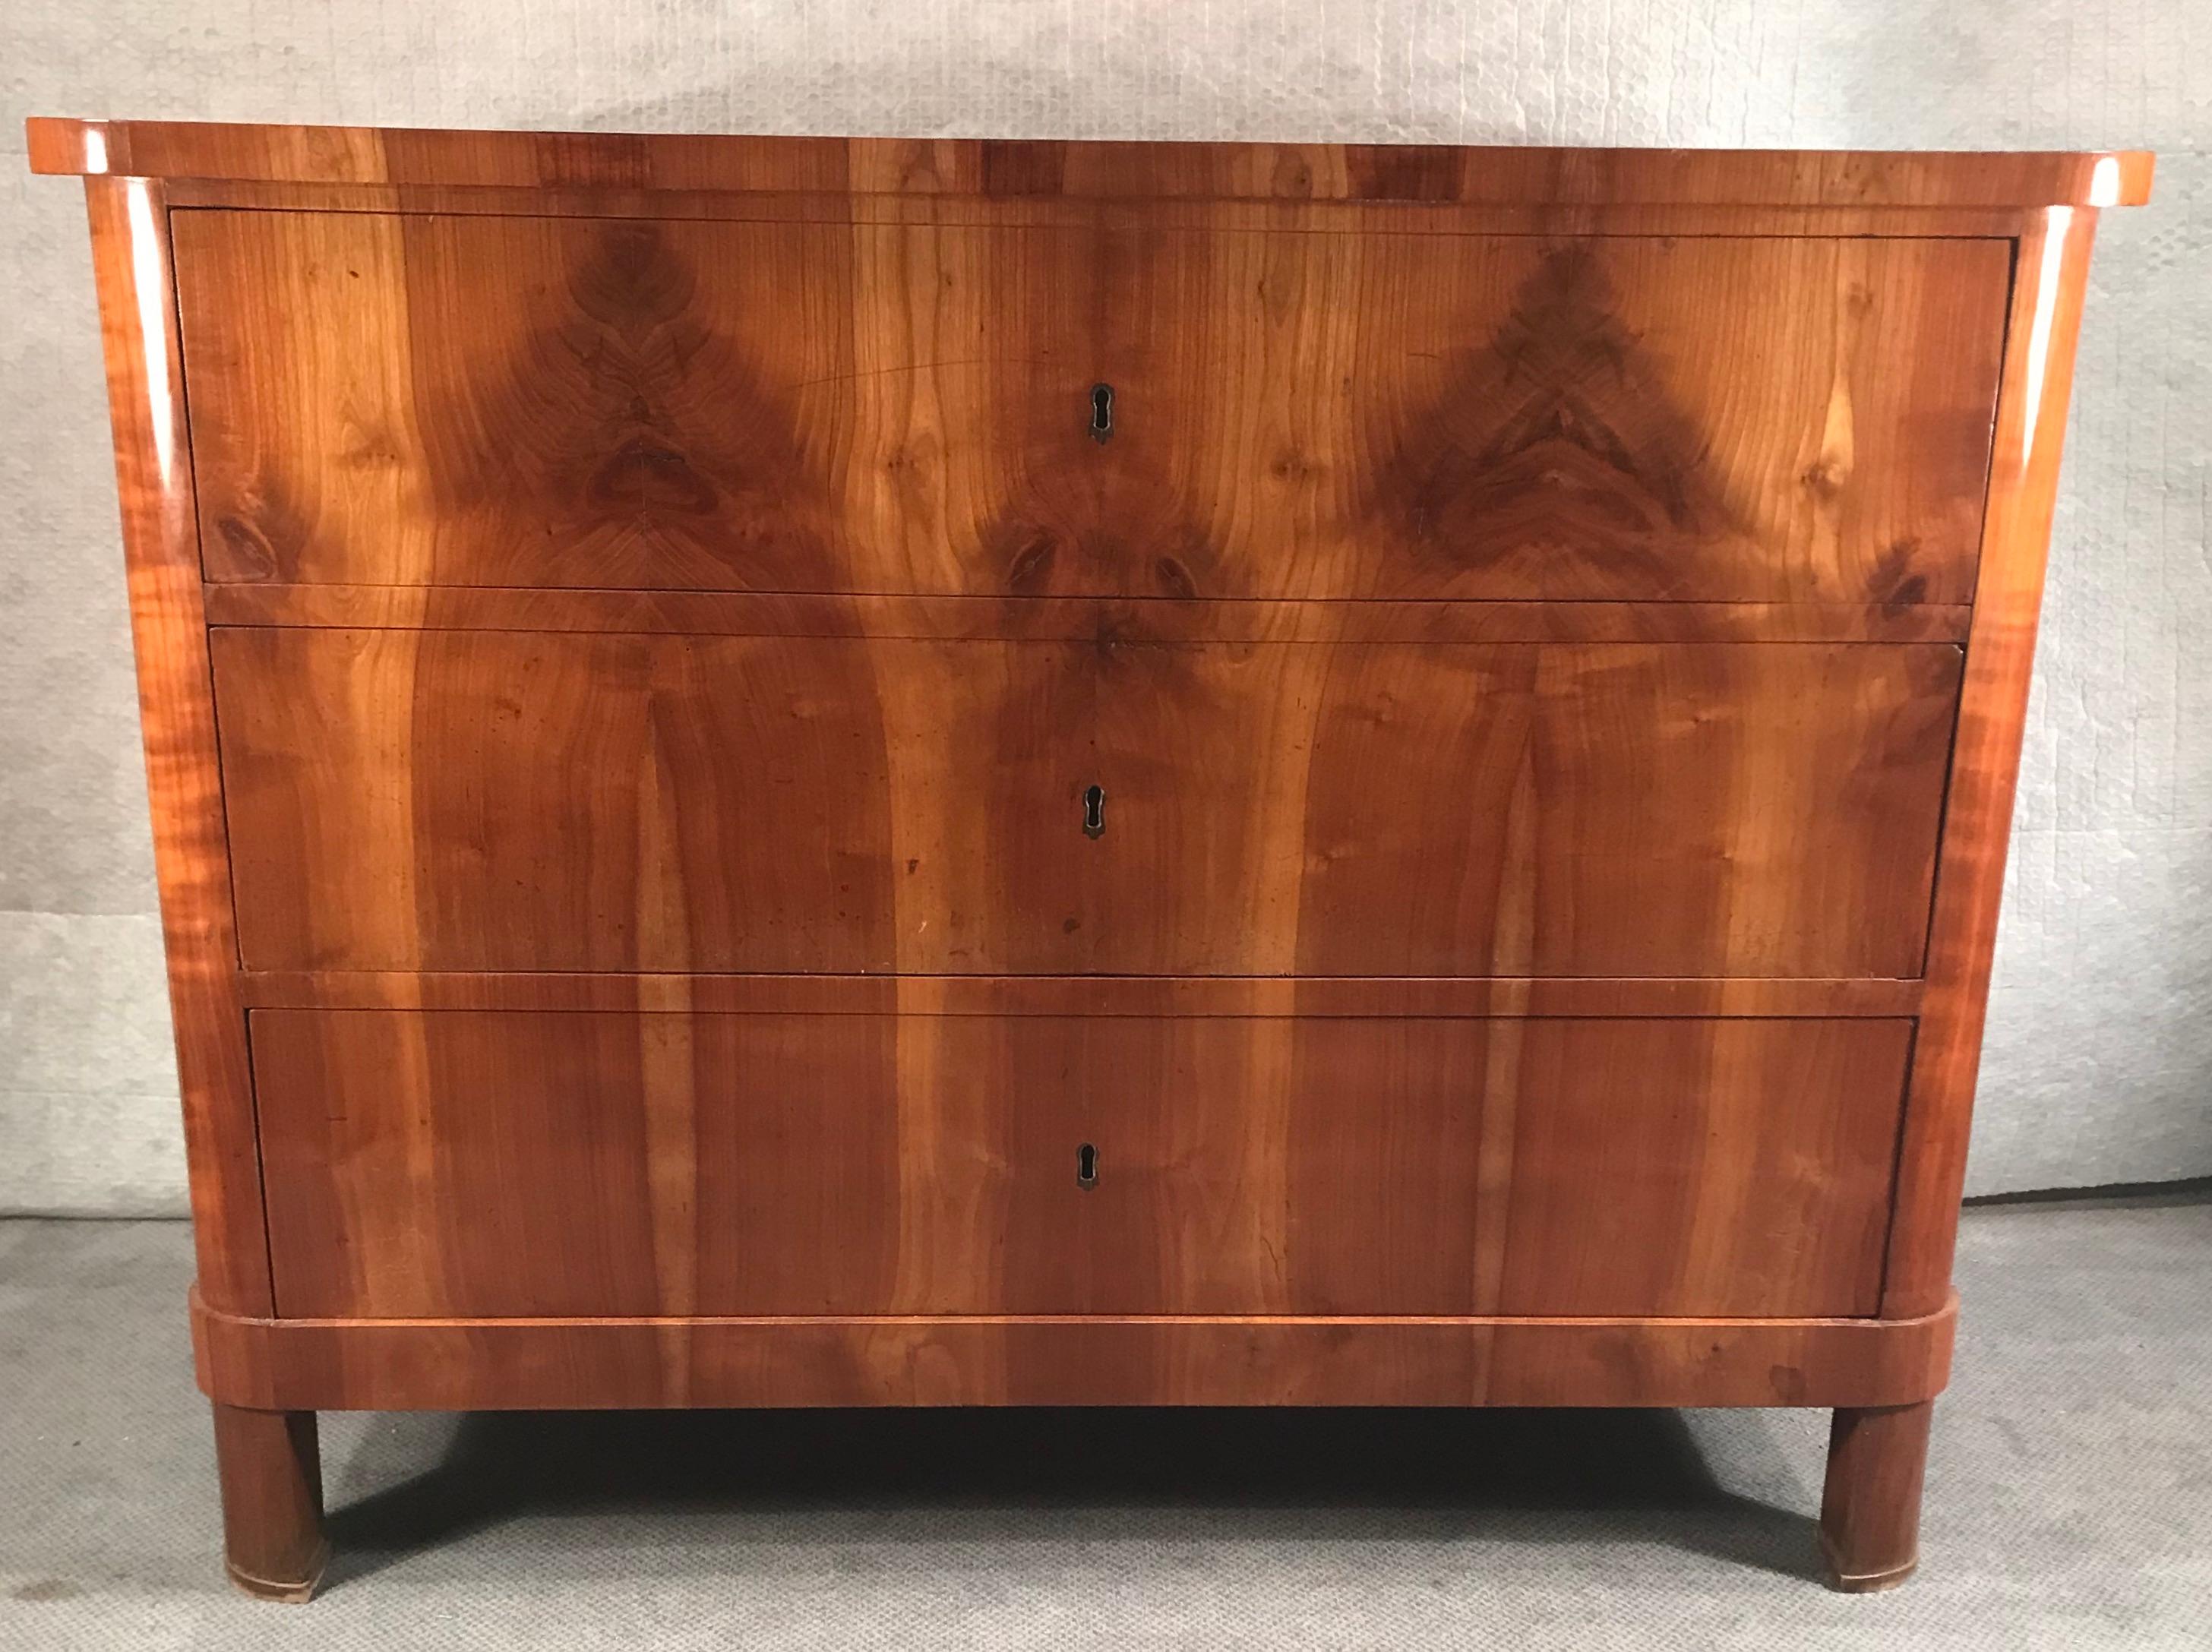 Biedermeier chest of drawers, South German, 1820.
The three drawer commode stands out for its Classic, plain design and the beautiful cherry veneer decoration.
It comes professionally refinished and French polished.